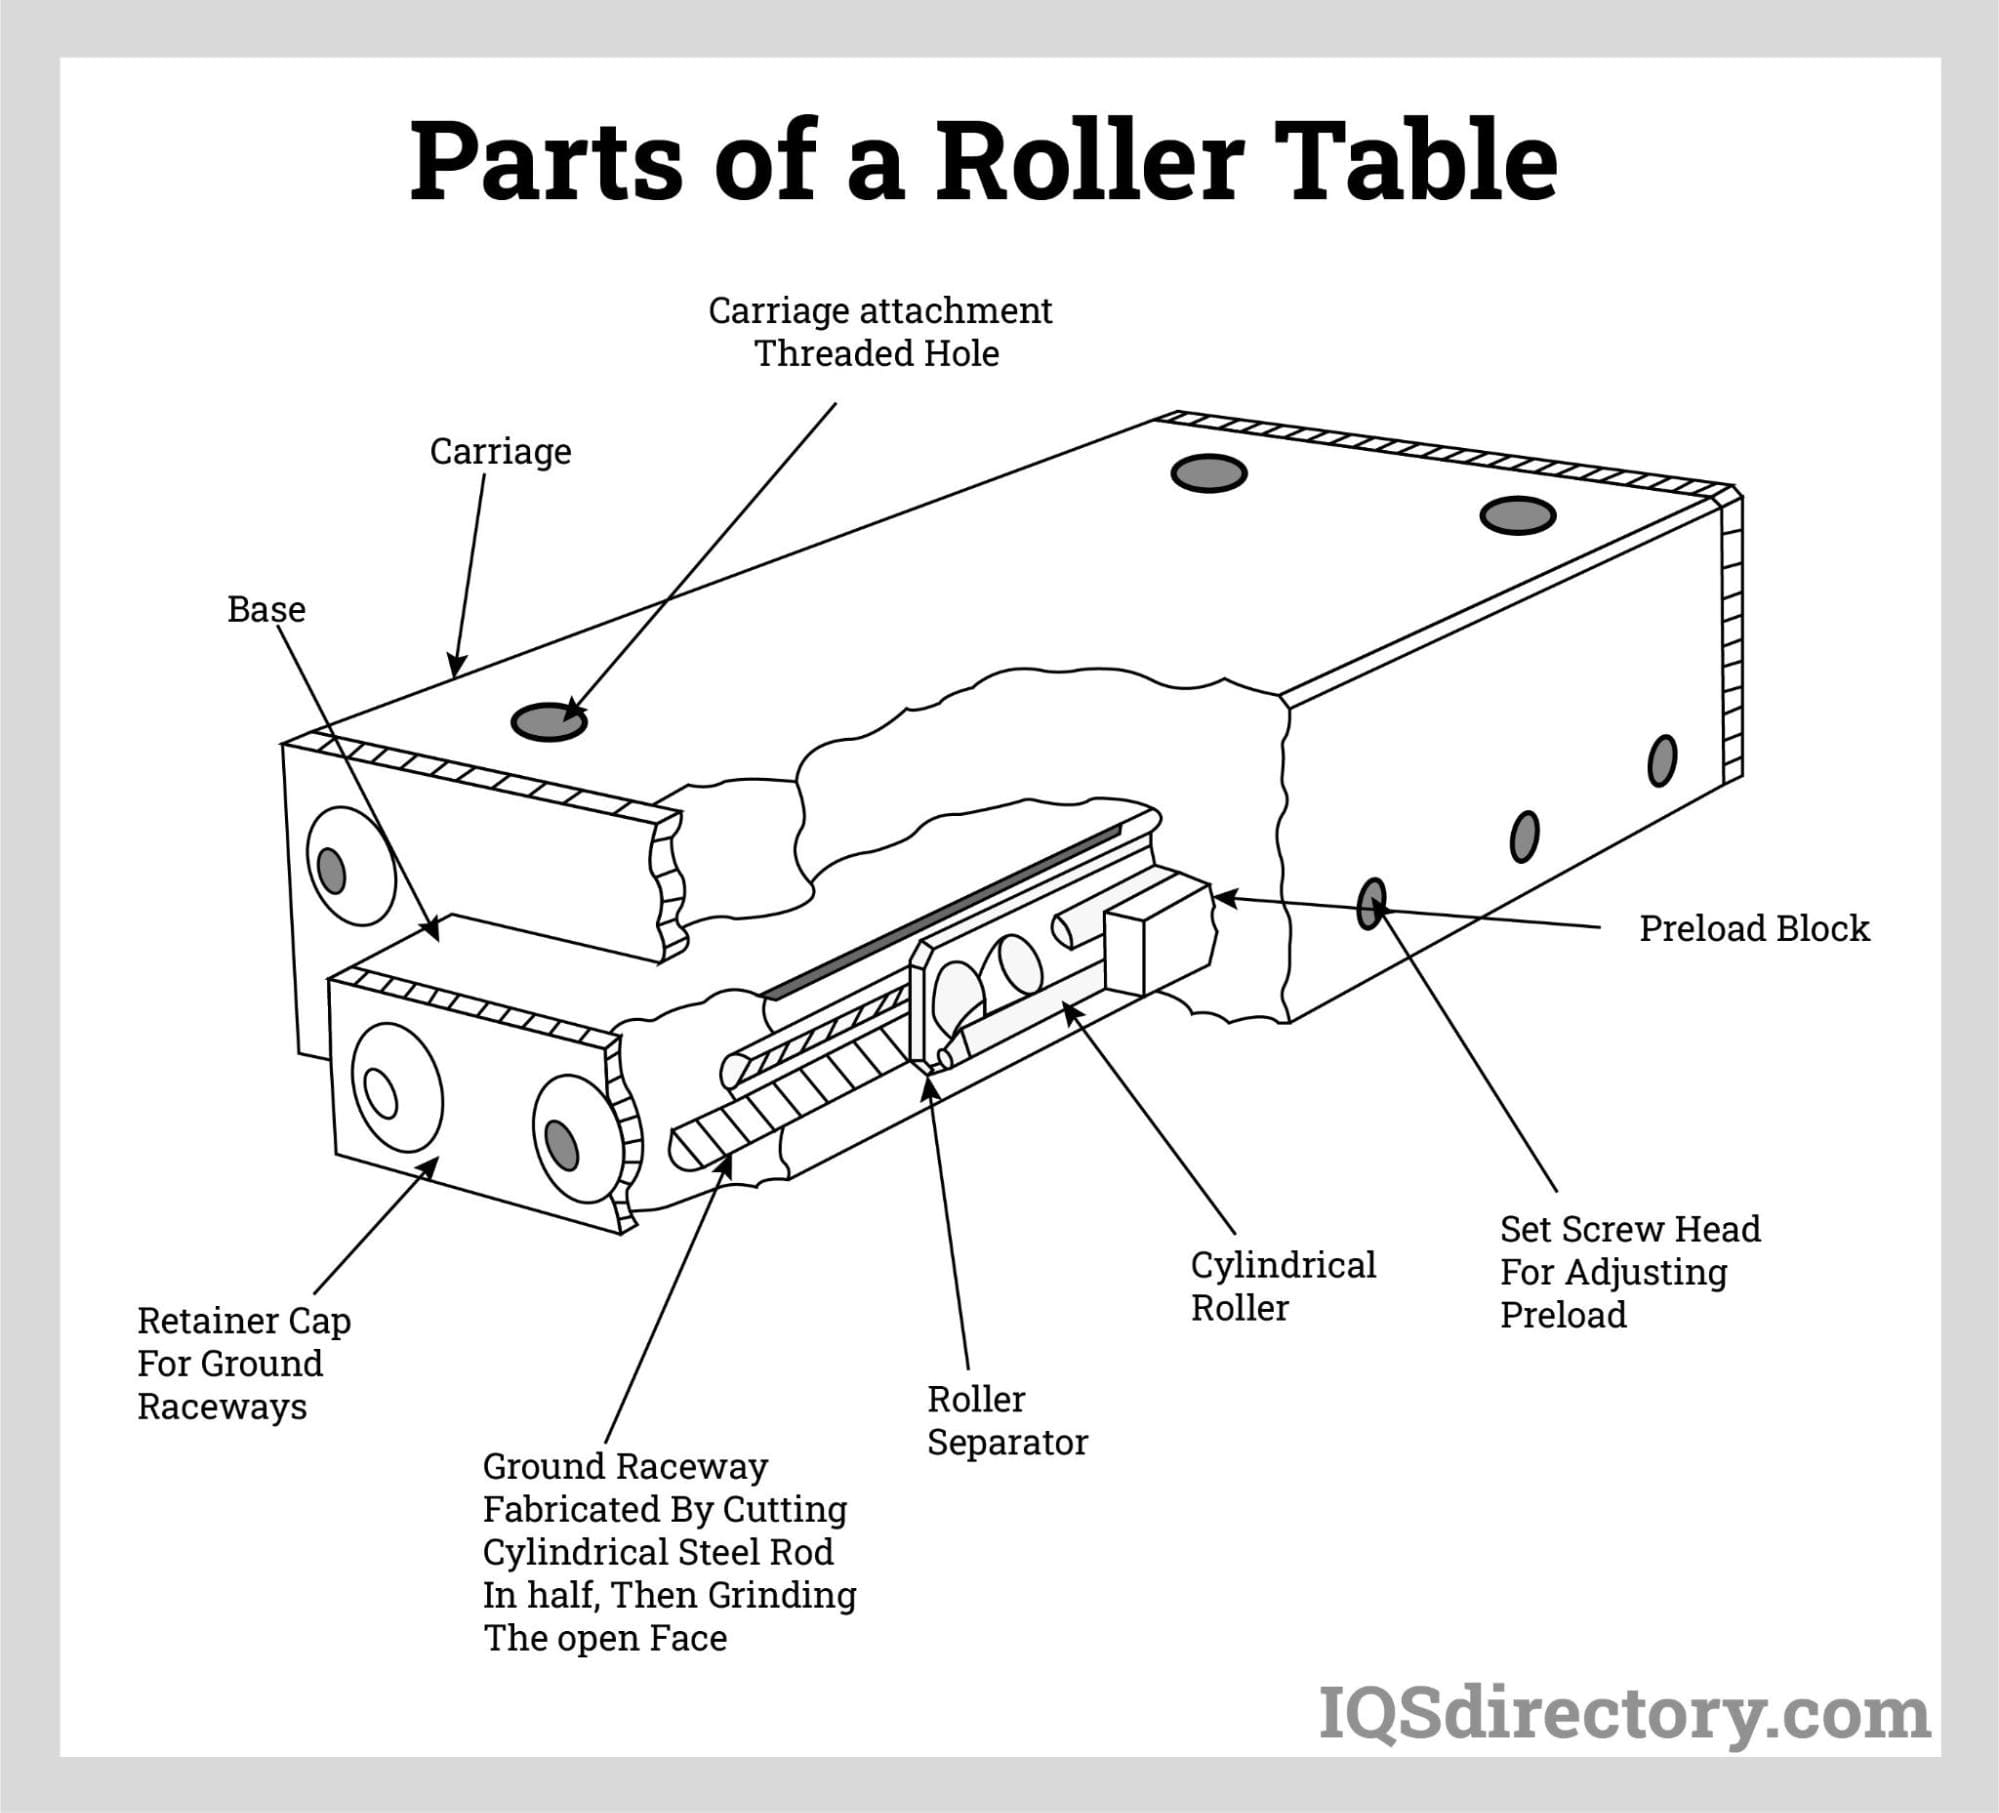 Roller Tables